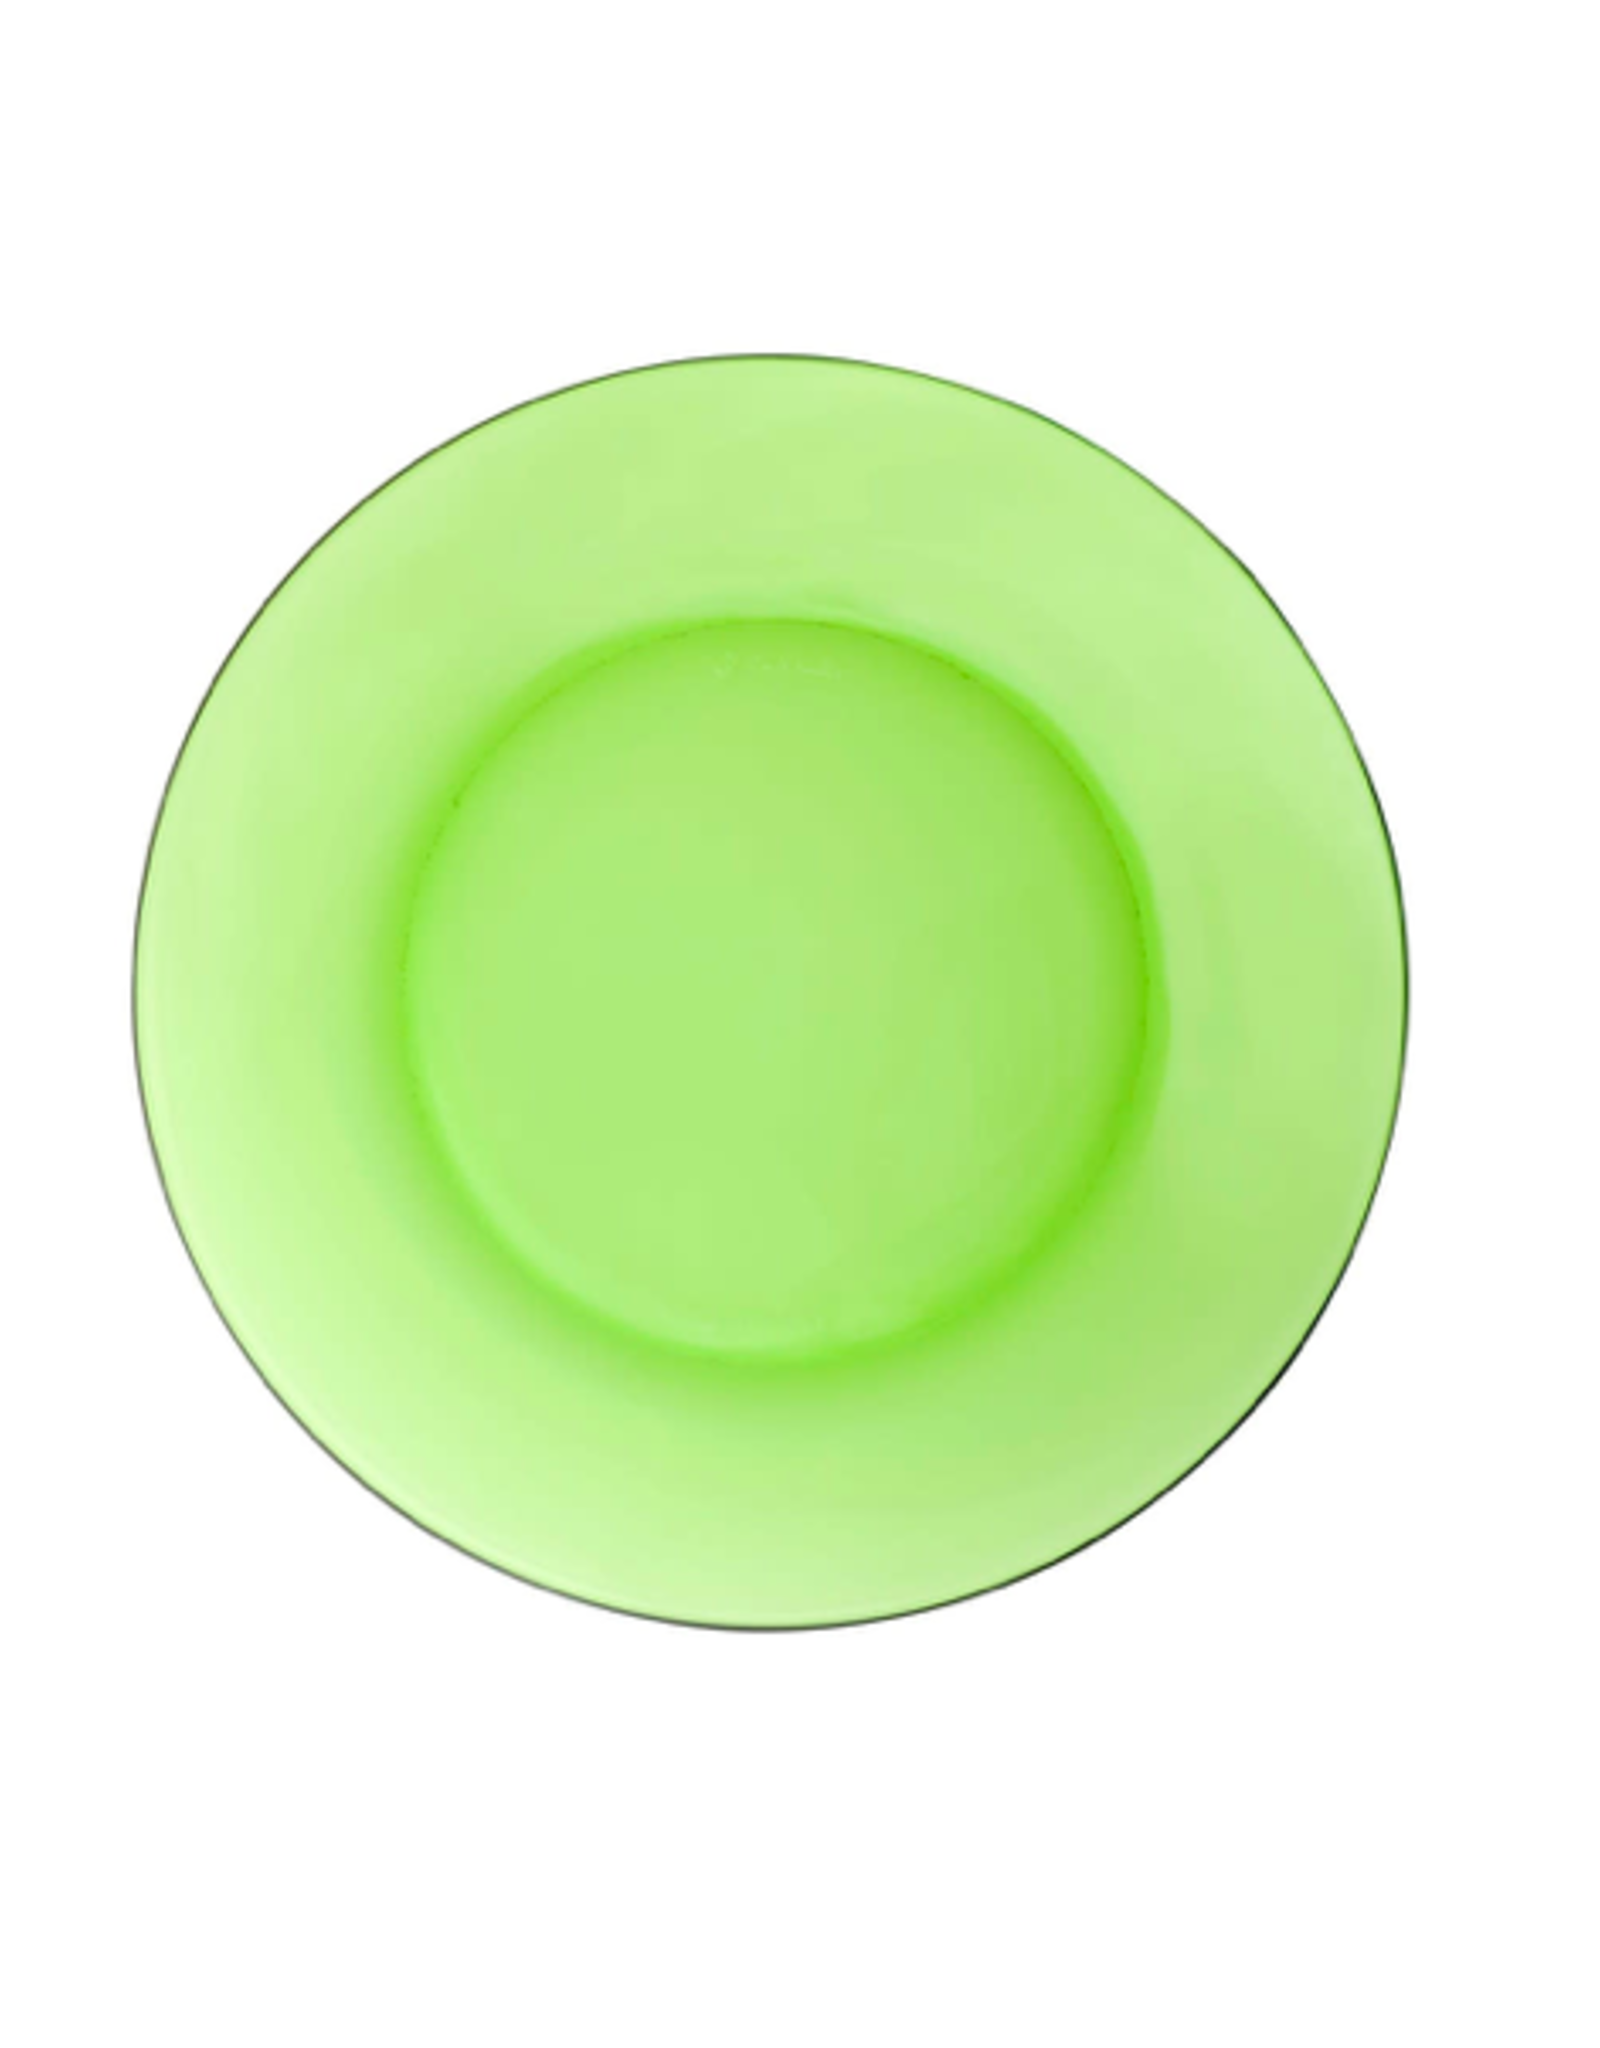 TIMCo ICM - Duralex Glass Plate / Picardie, Green, 7.5"